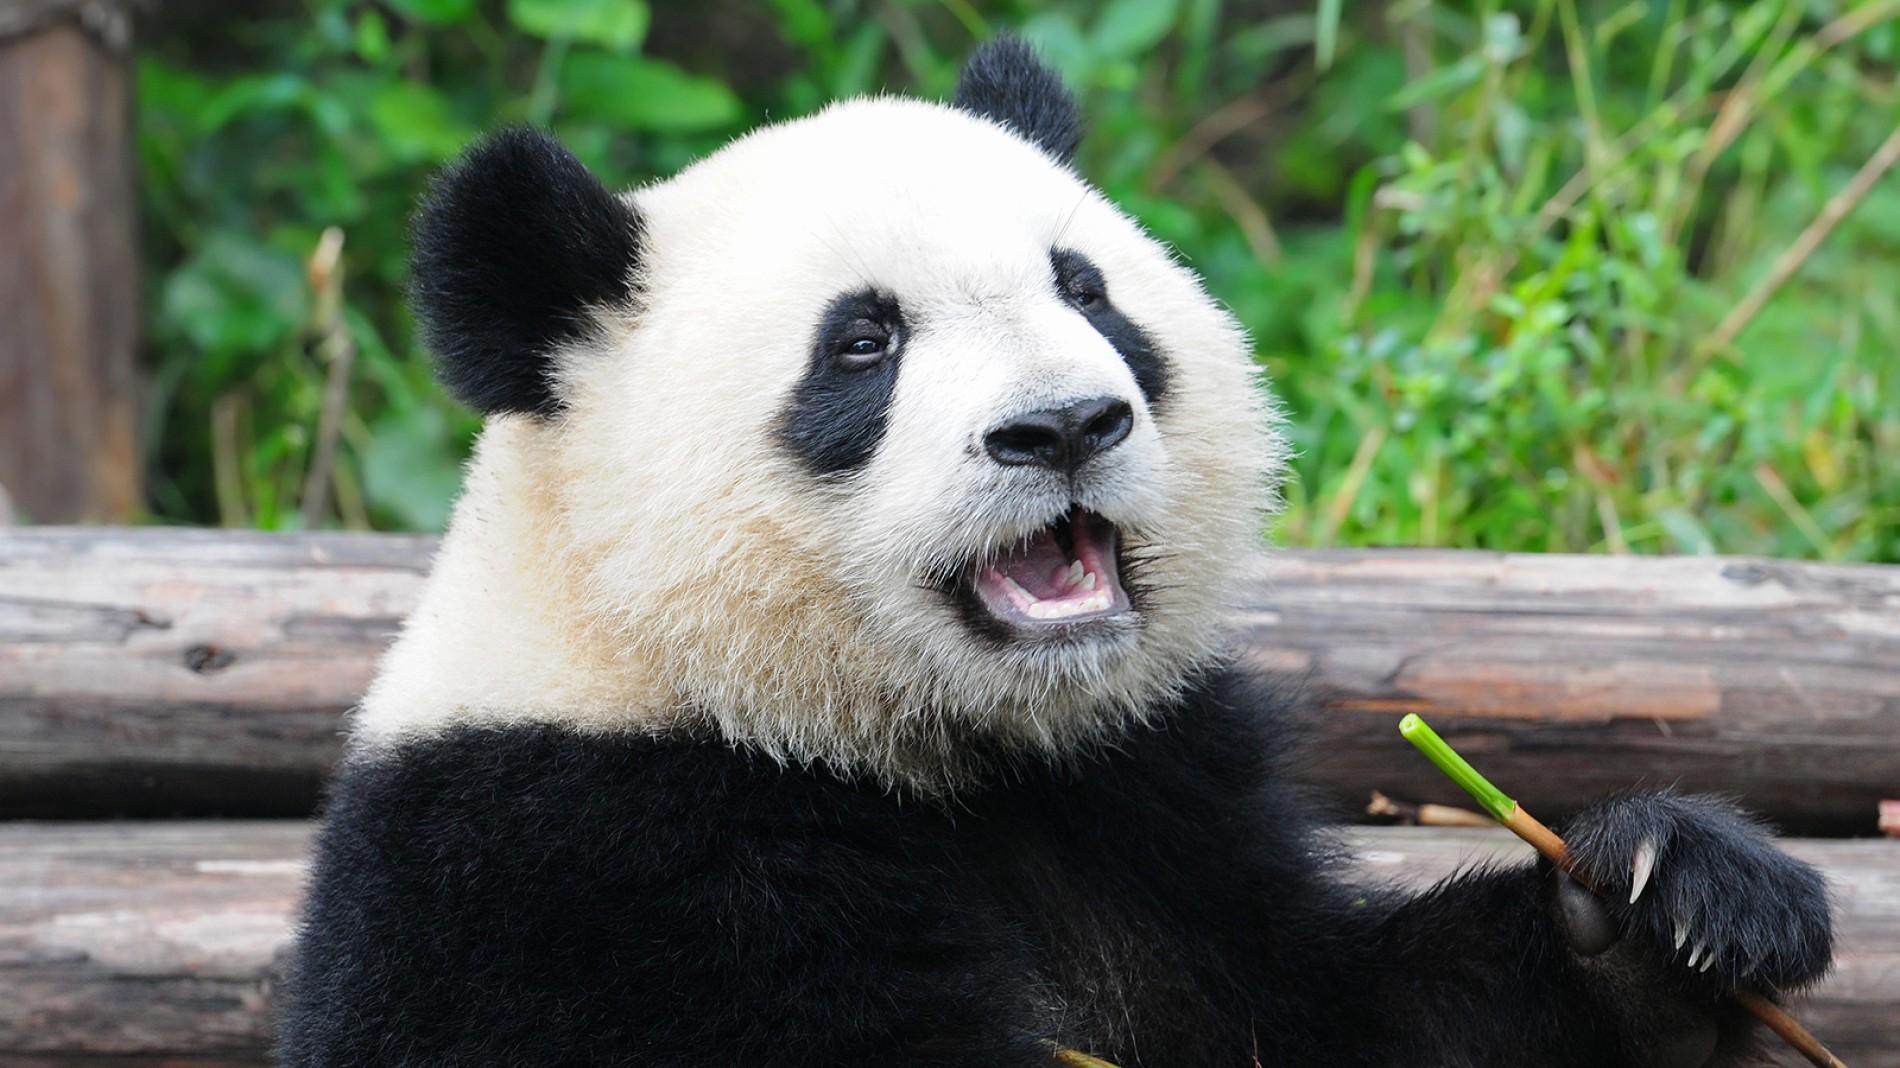 Giant Panda Facts and Pictures